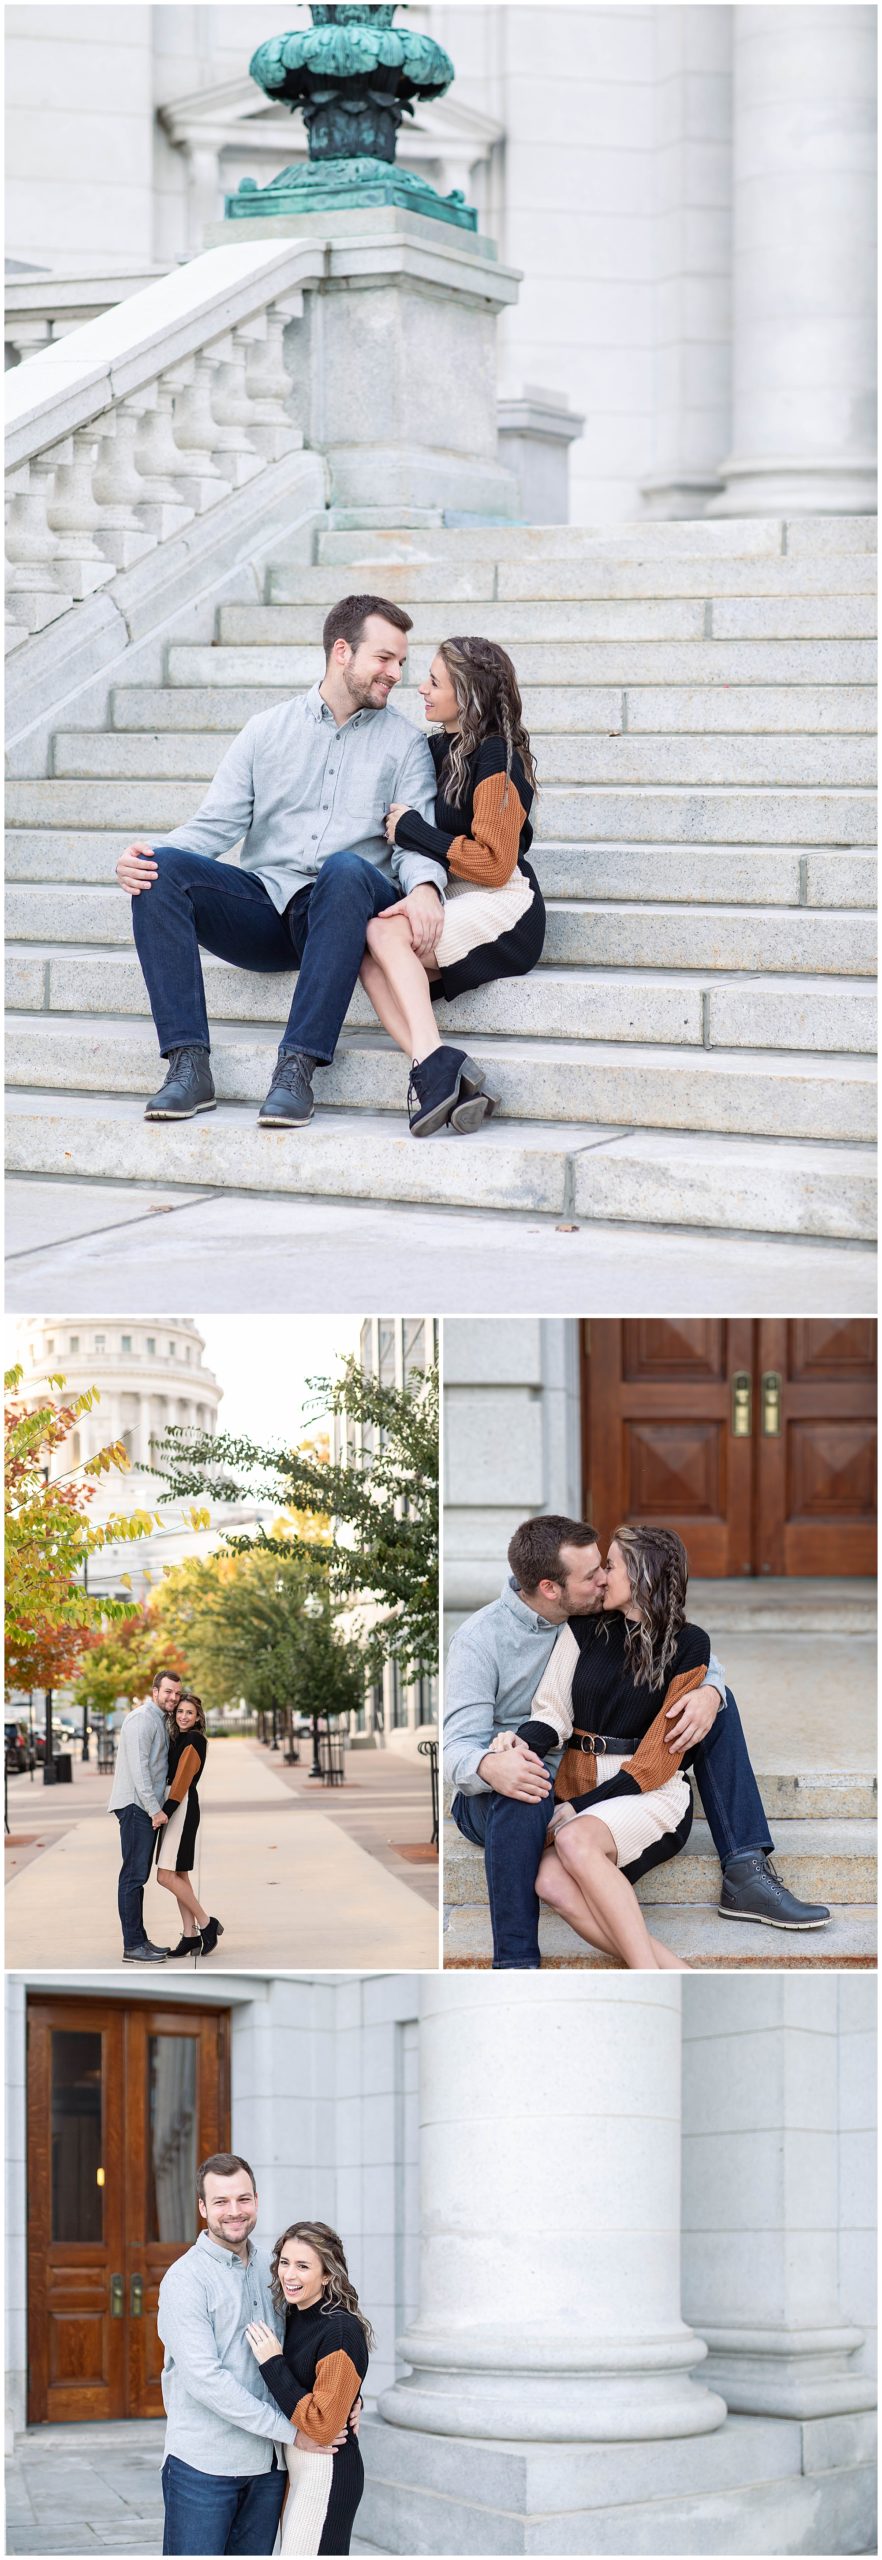 Engagement Photos at the Monona Terrace and Wisconsin Capitol in Madison, WI